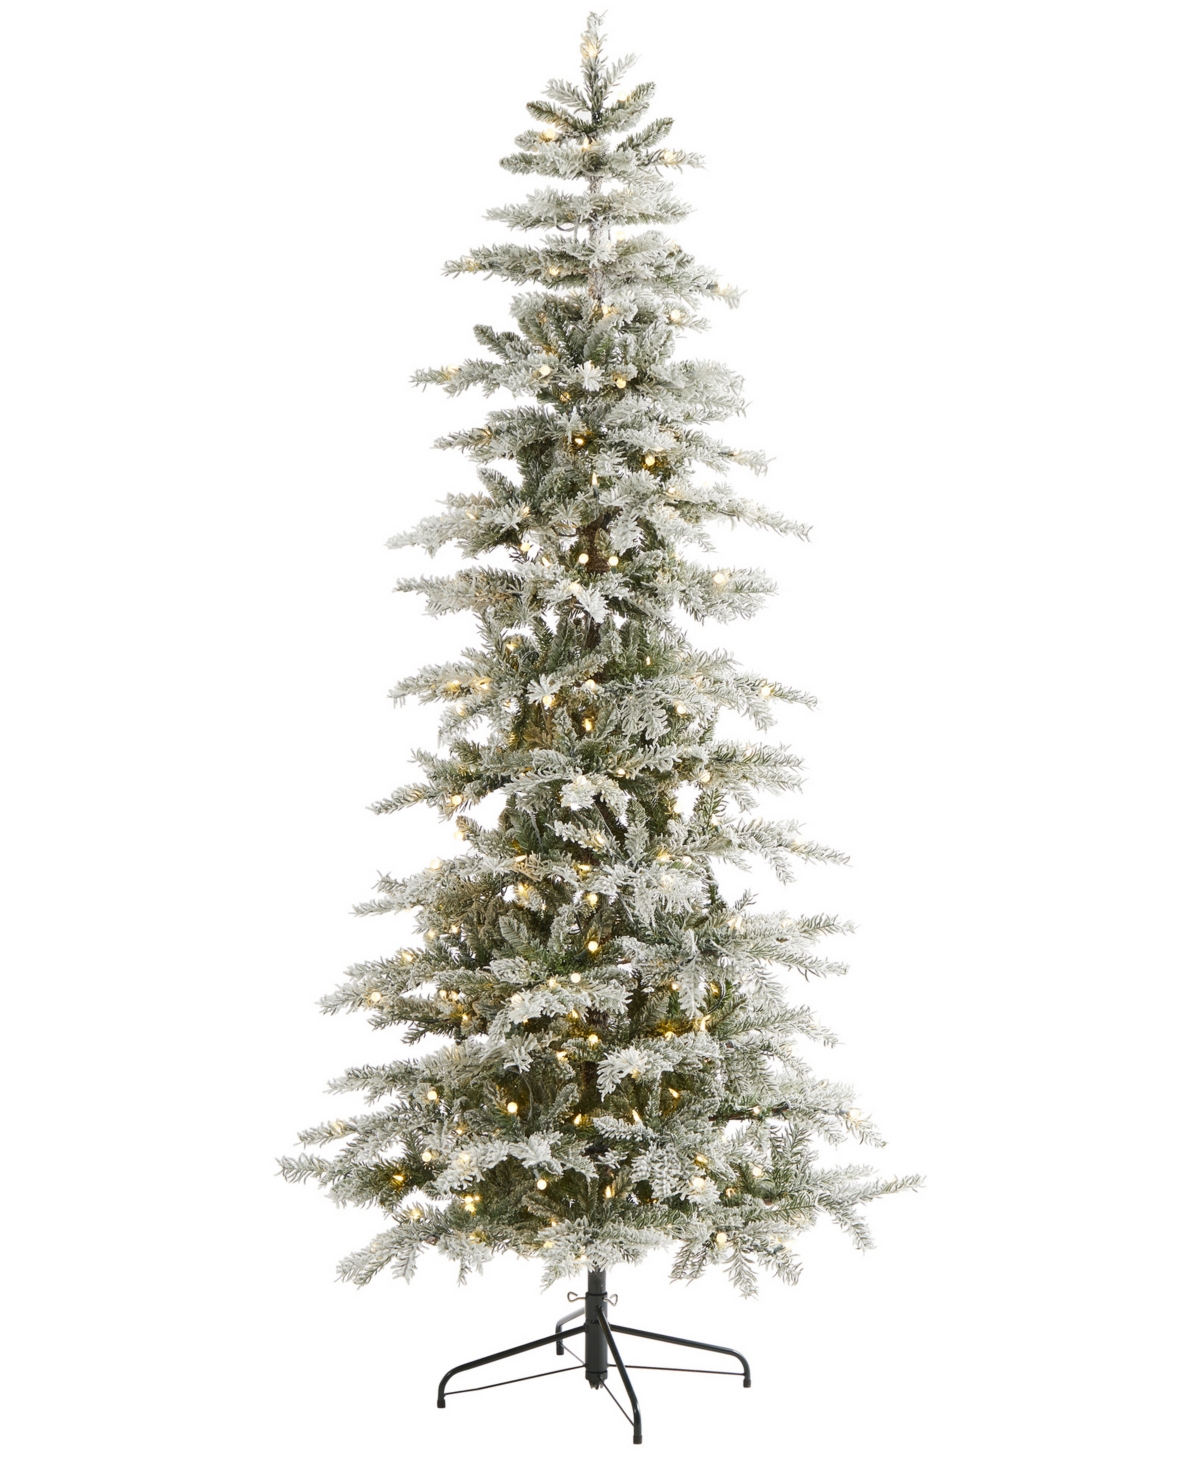 Slim Flocked Nova Scotia Spruce Artificial Christmas Tree with Lights and Bendable Branches, 90" - Green